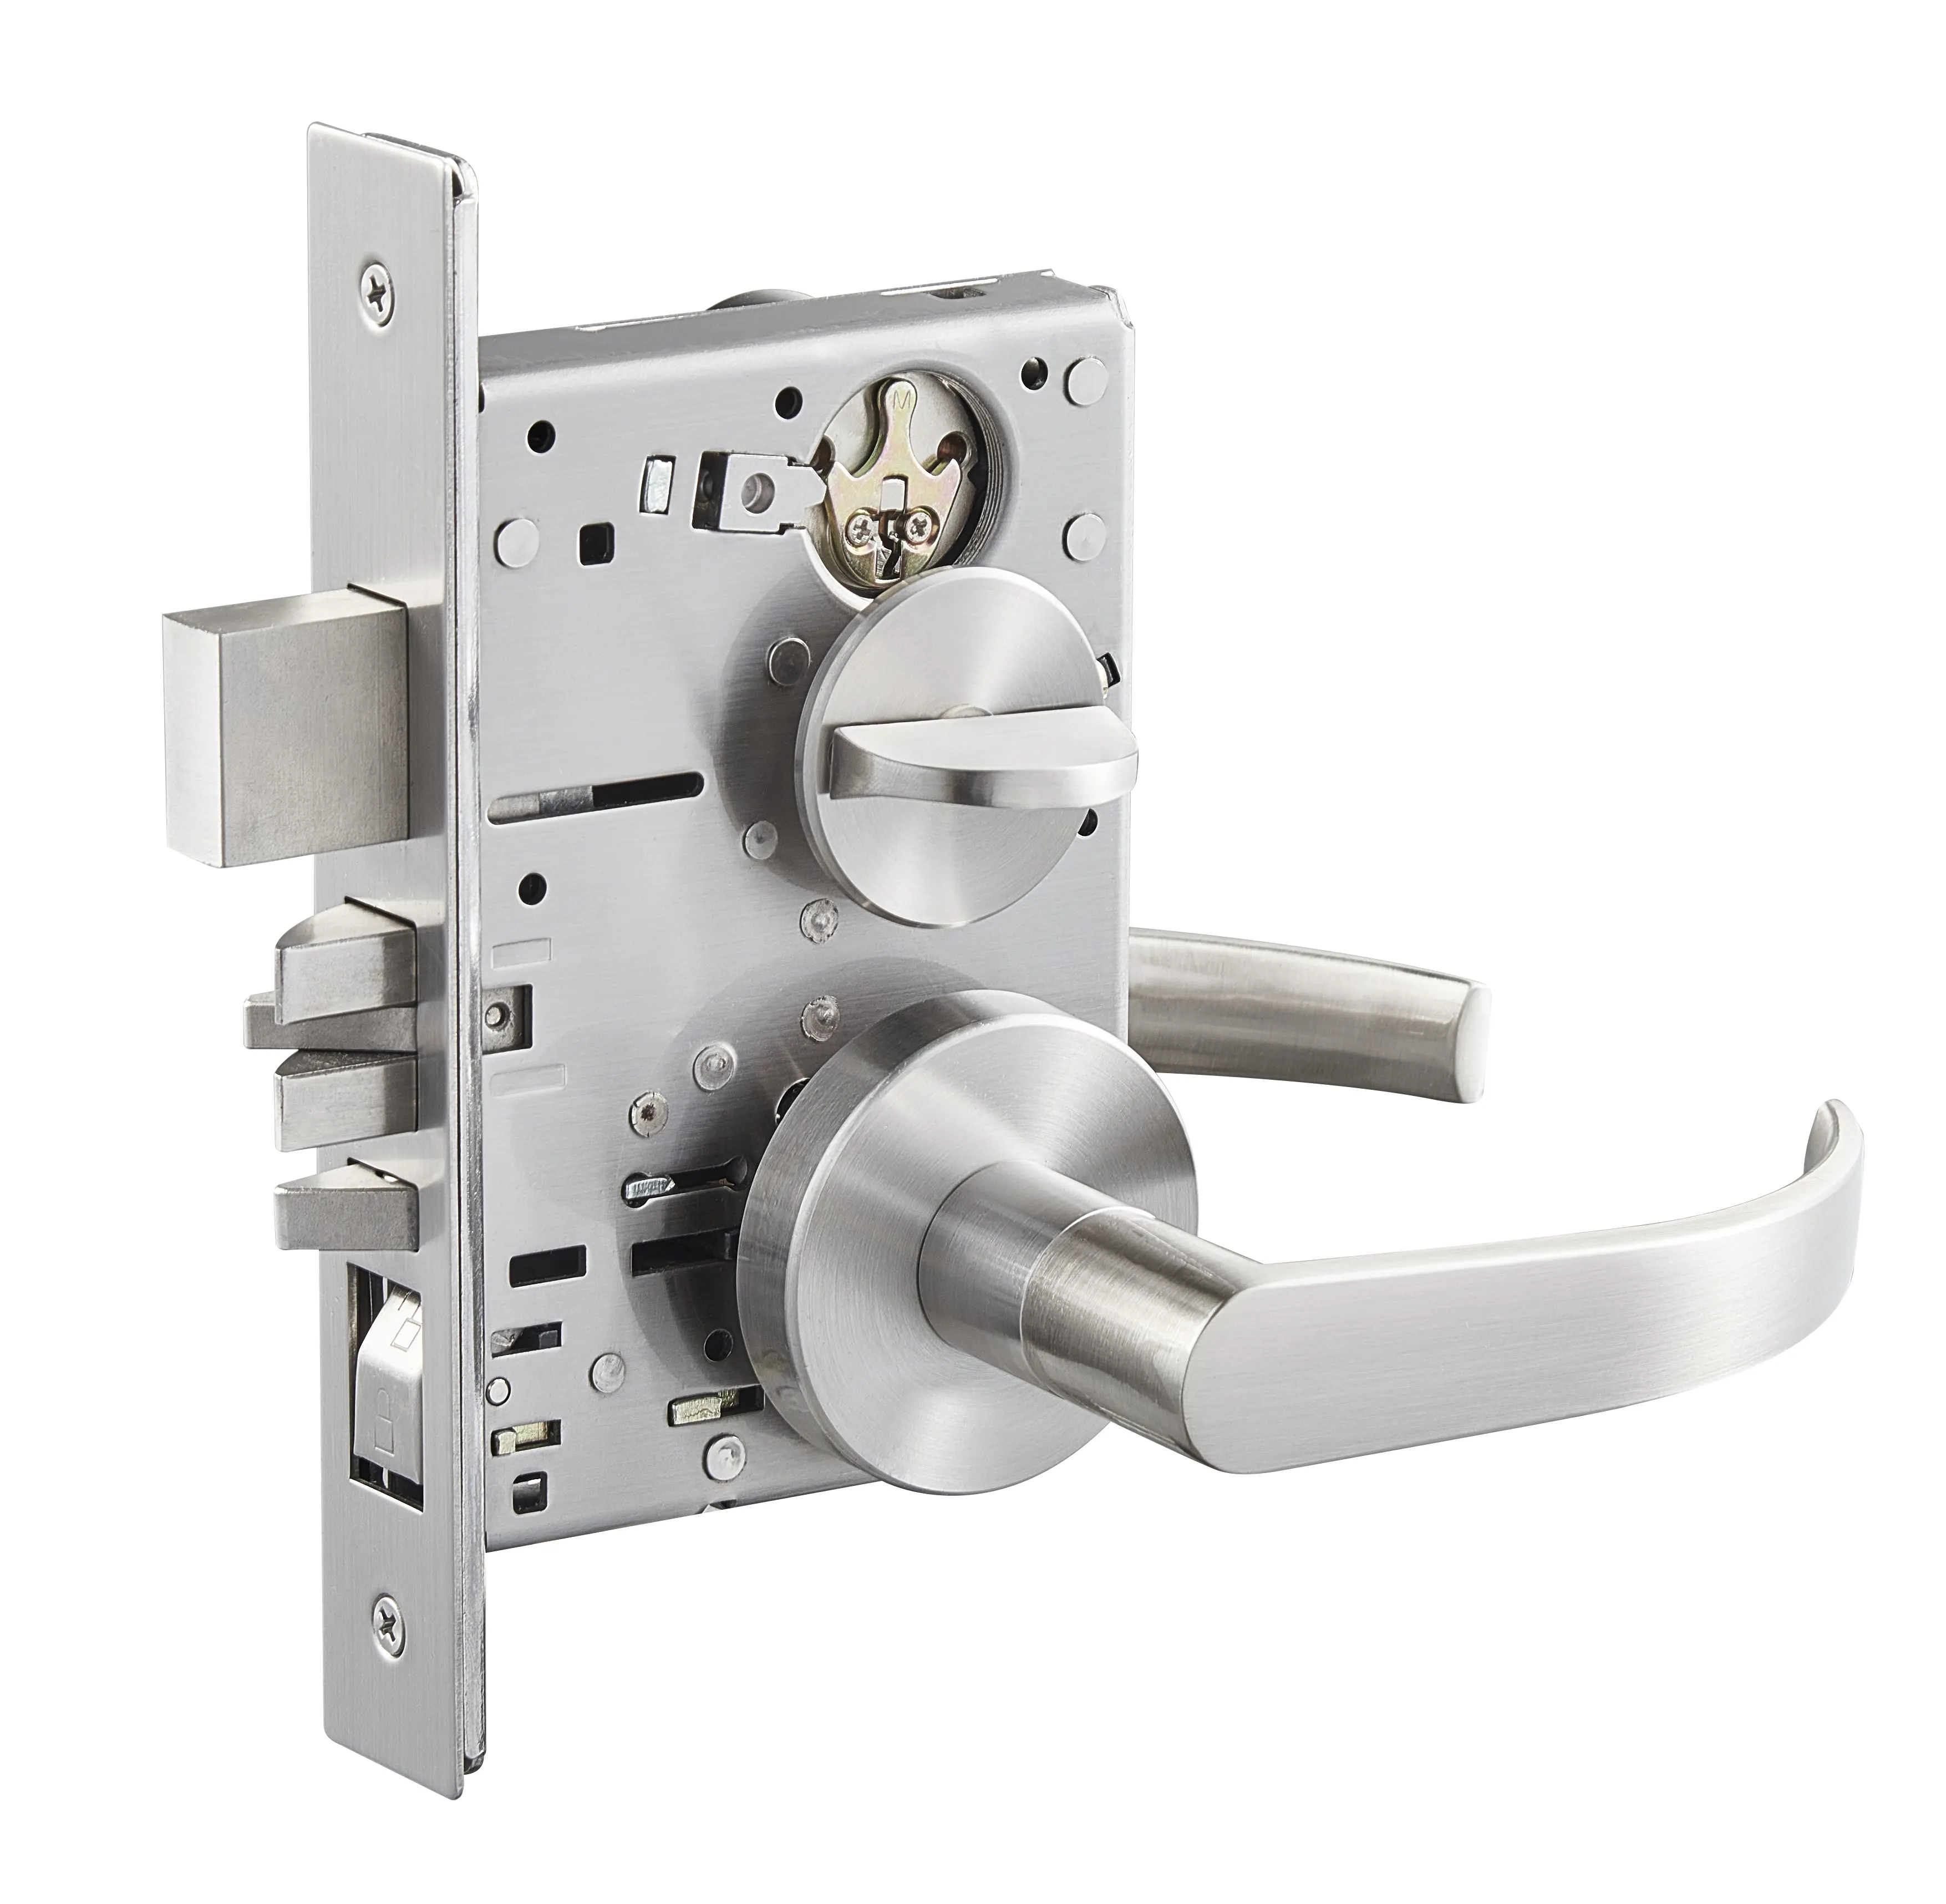 KEYMAN ANSI American Mortise Lock FApartment puede ser un mecanismo electrónico con solenoide U.L Fire Rated 3H ANSI